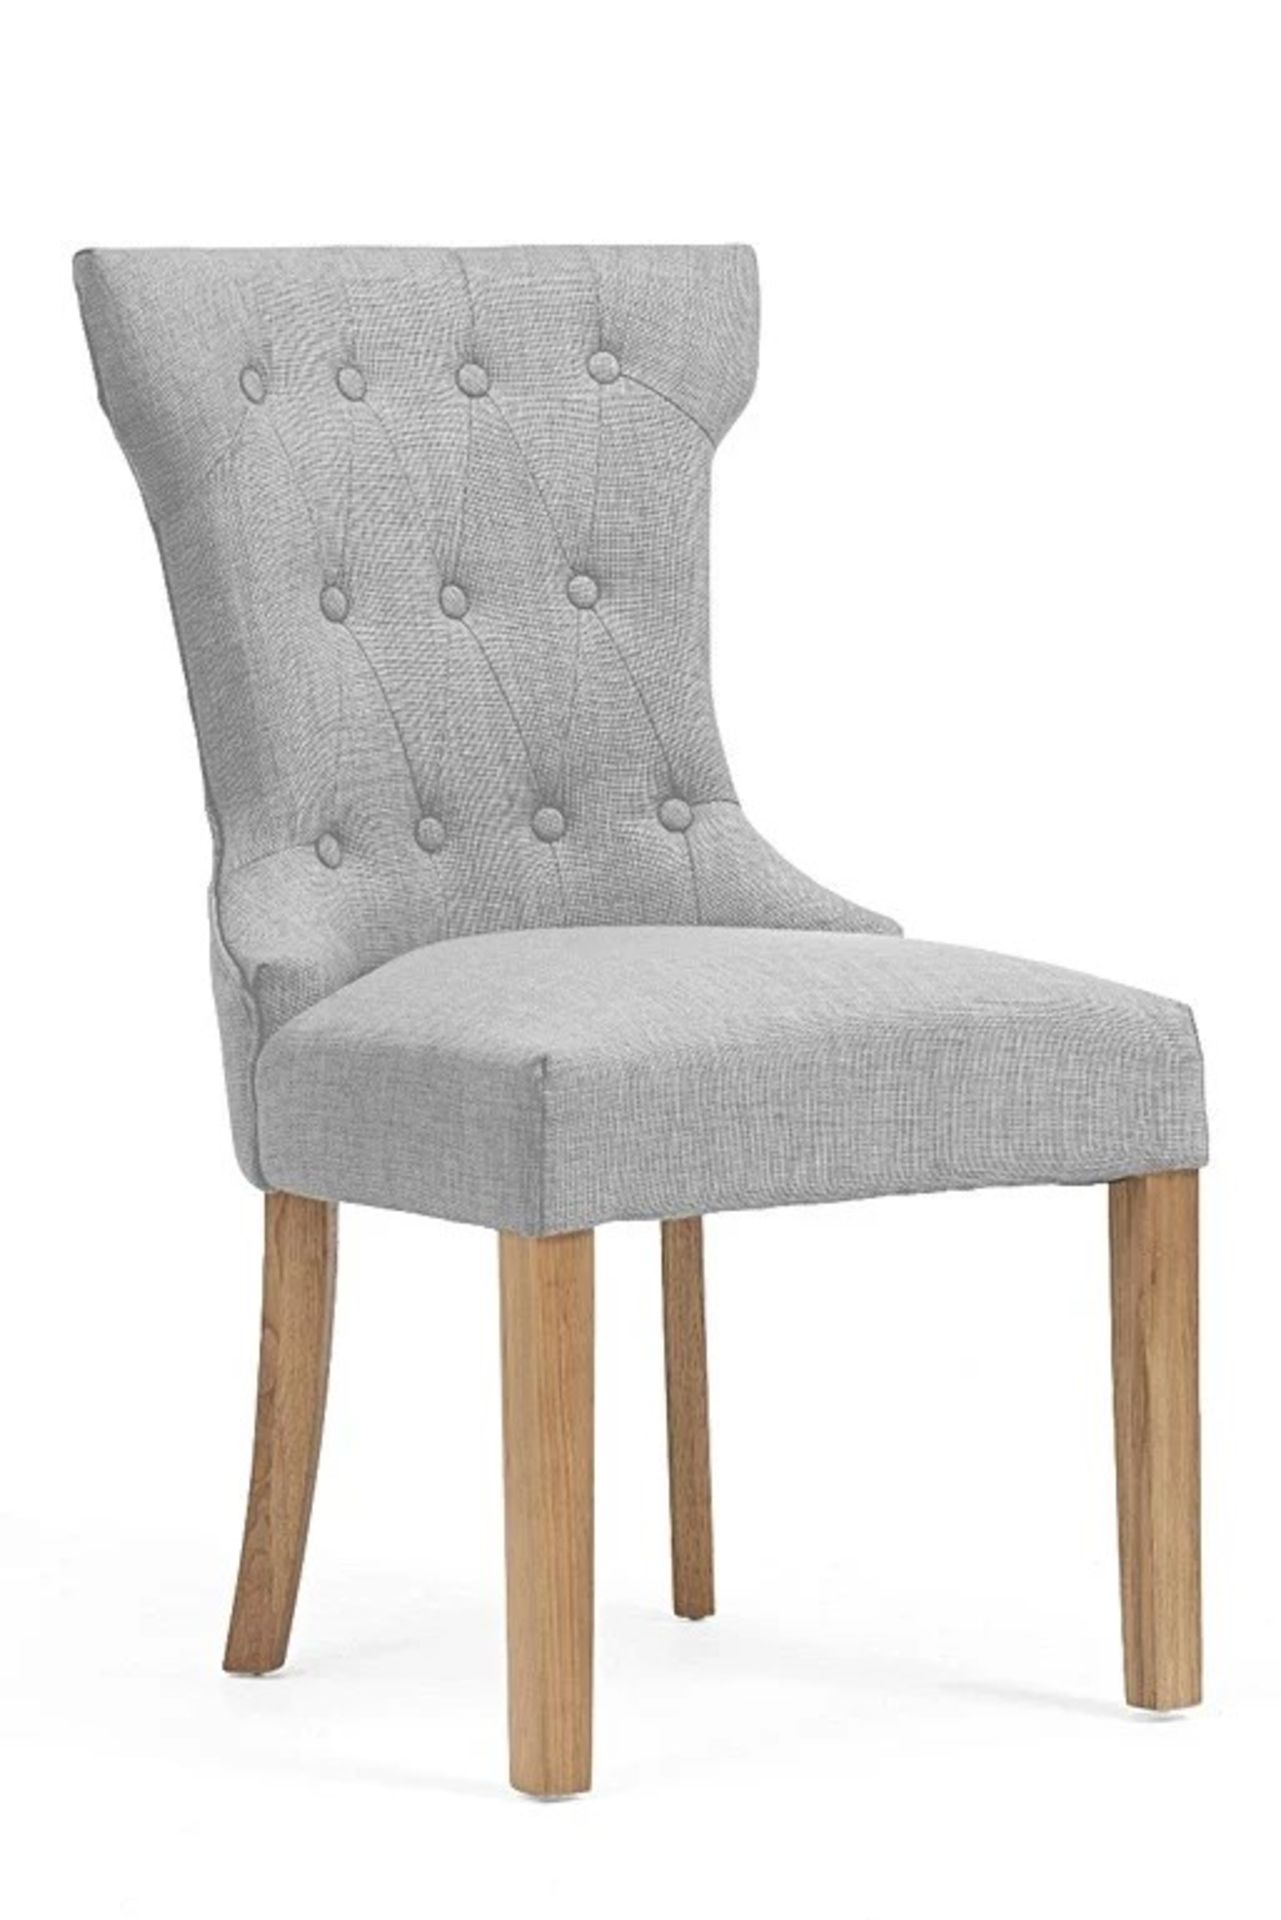 A set of 2 x Camille Grey Dining Chairs The Camille collection exudes high-end style, worthy of